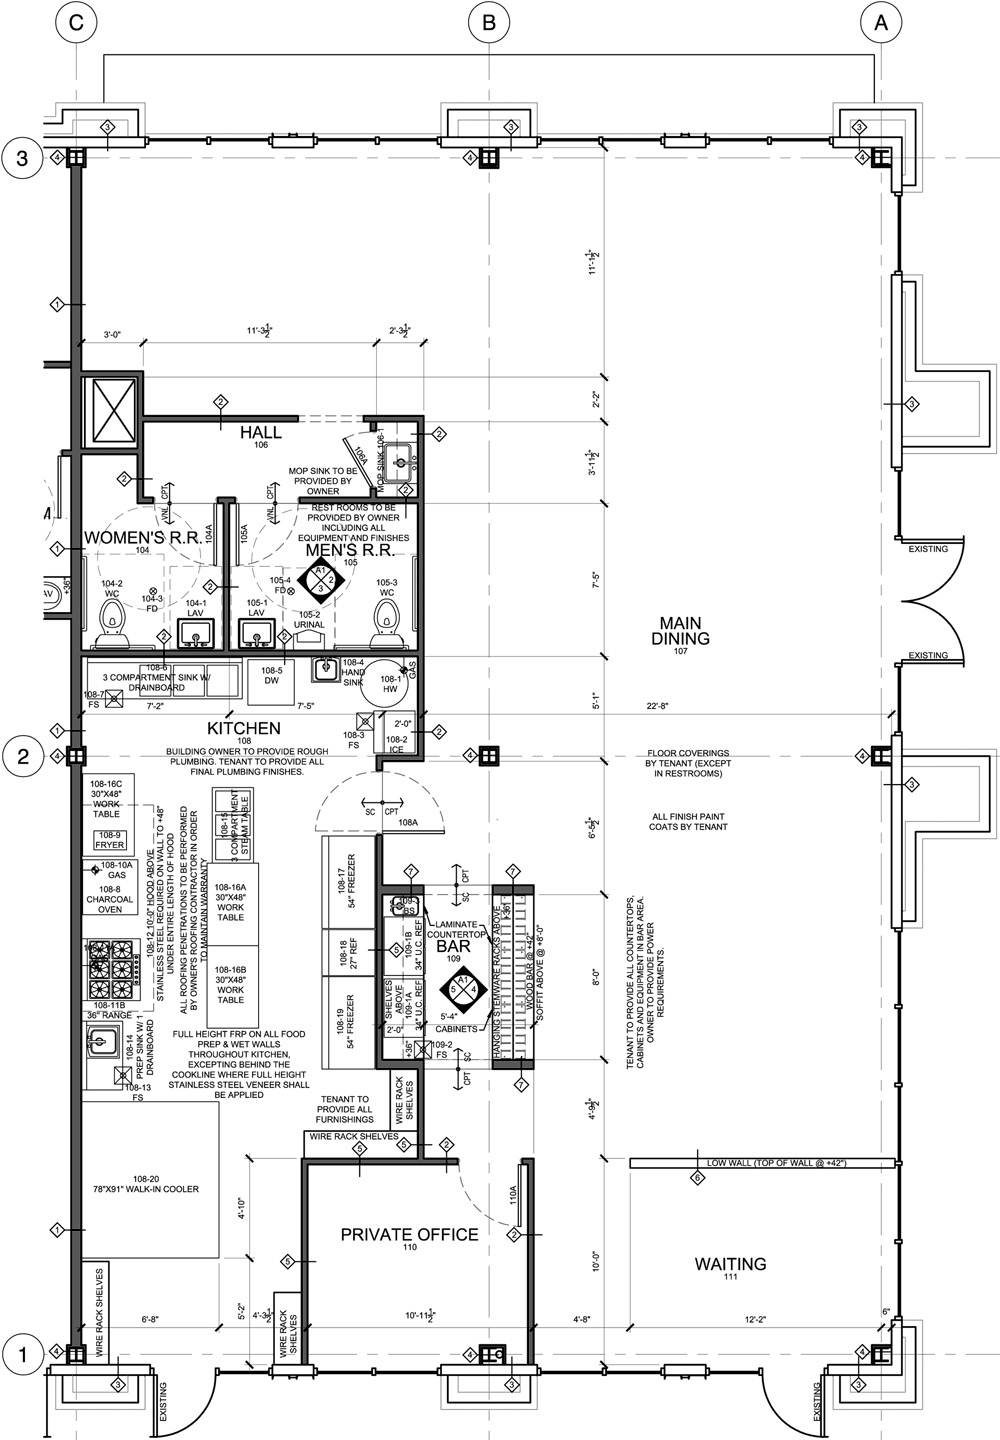 commercial kitchen floor plan | home design and decor reviews